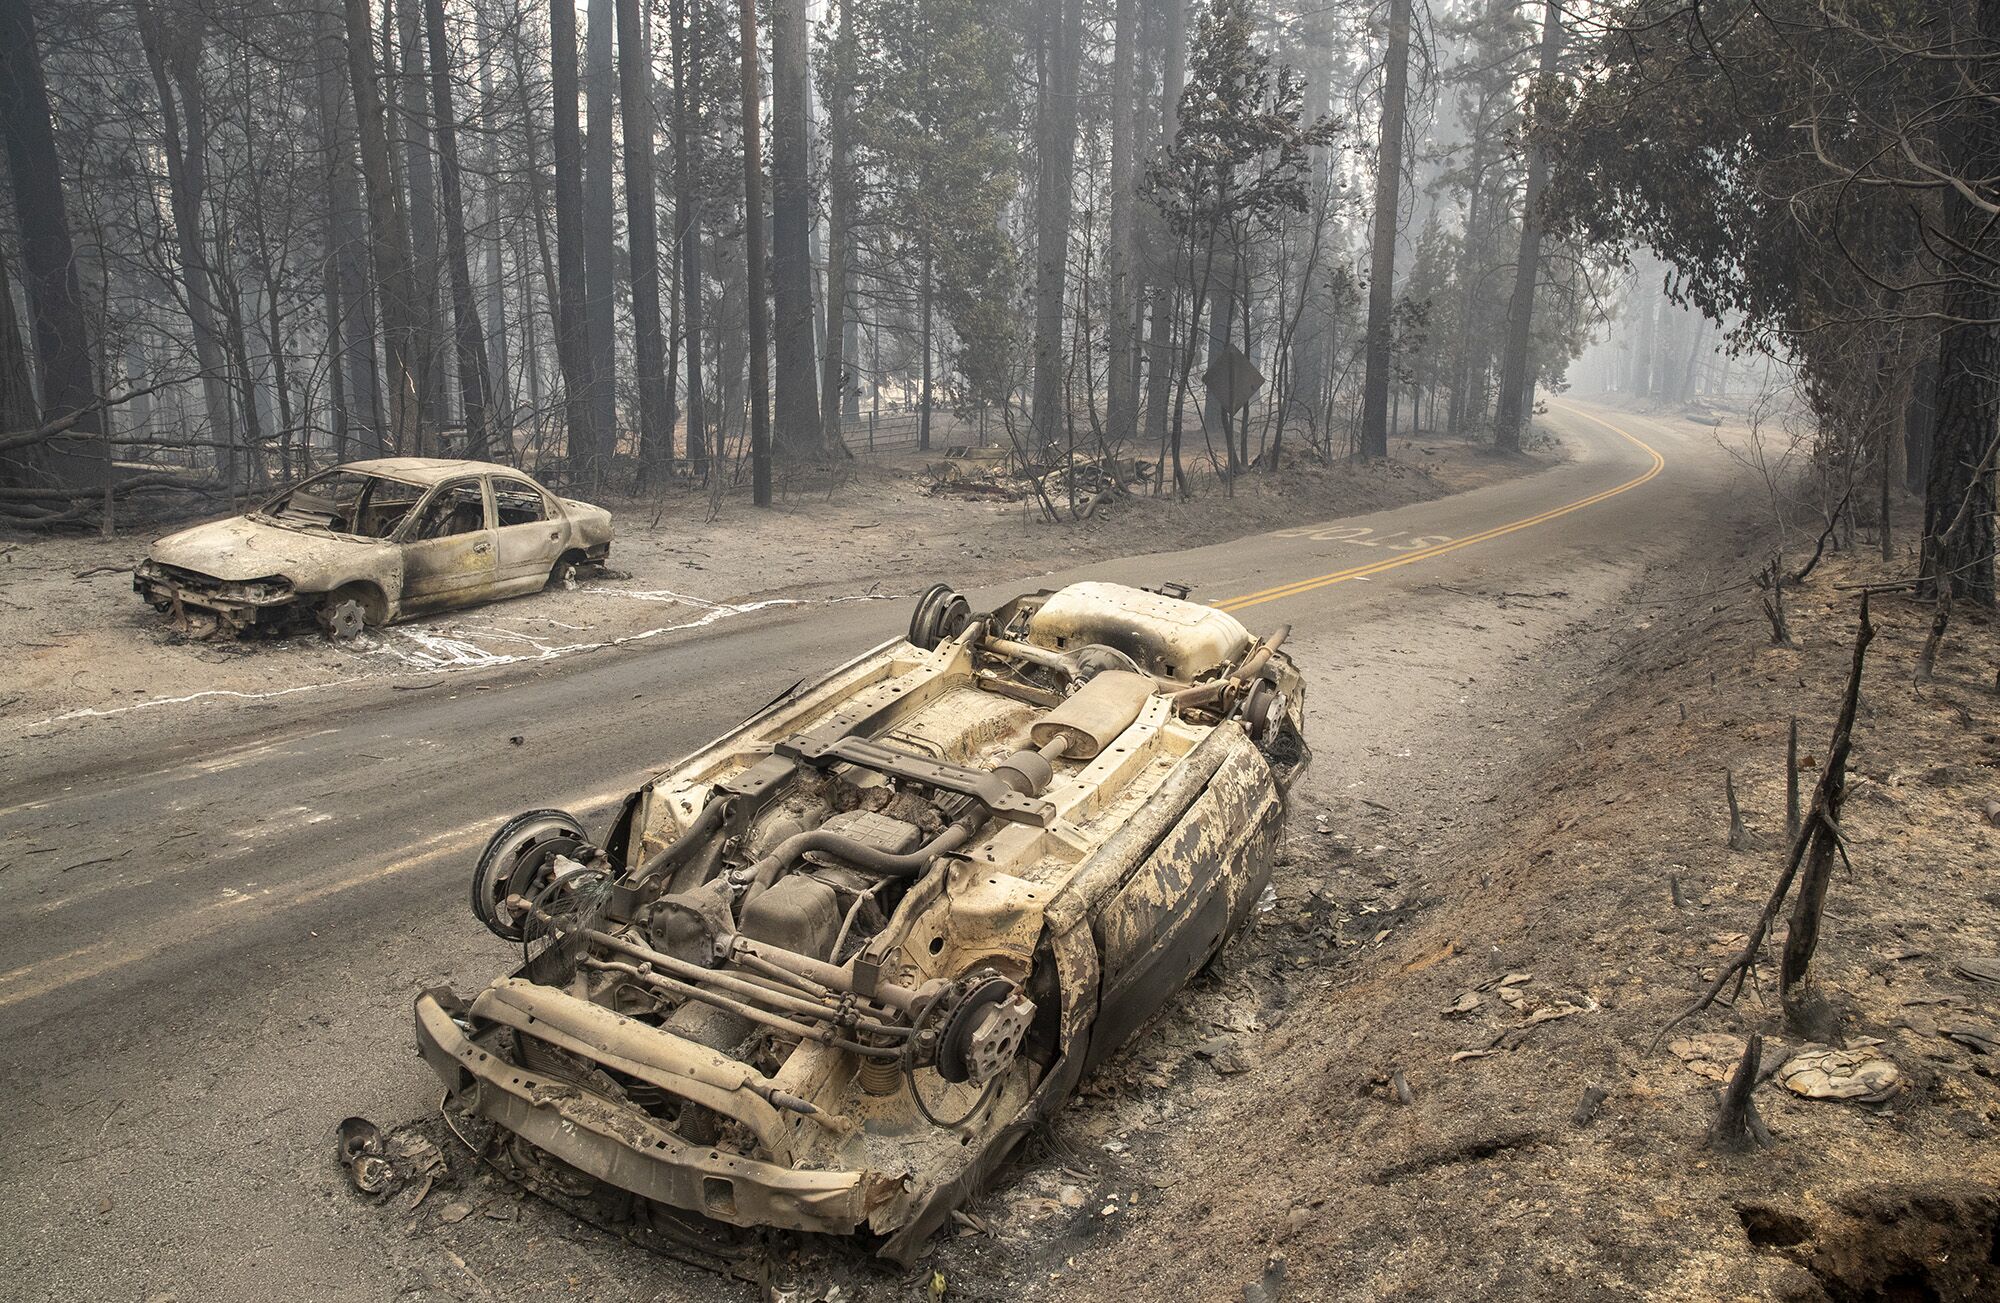 An overturned, burned-out car on an ash-covered road in the aftermath of the Bear fire.